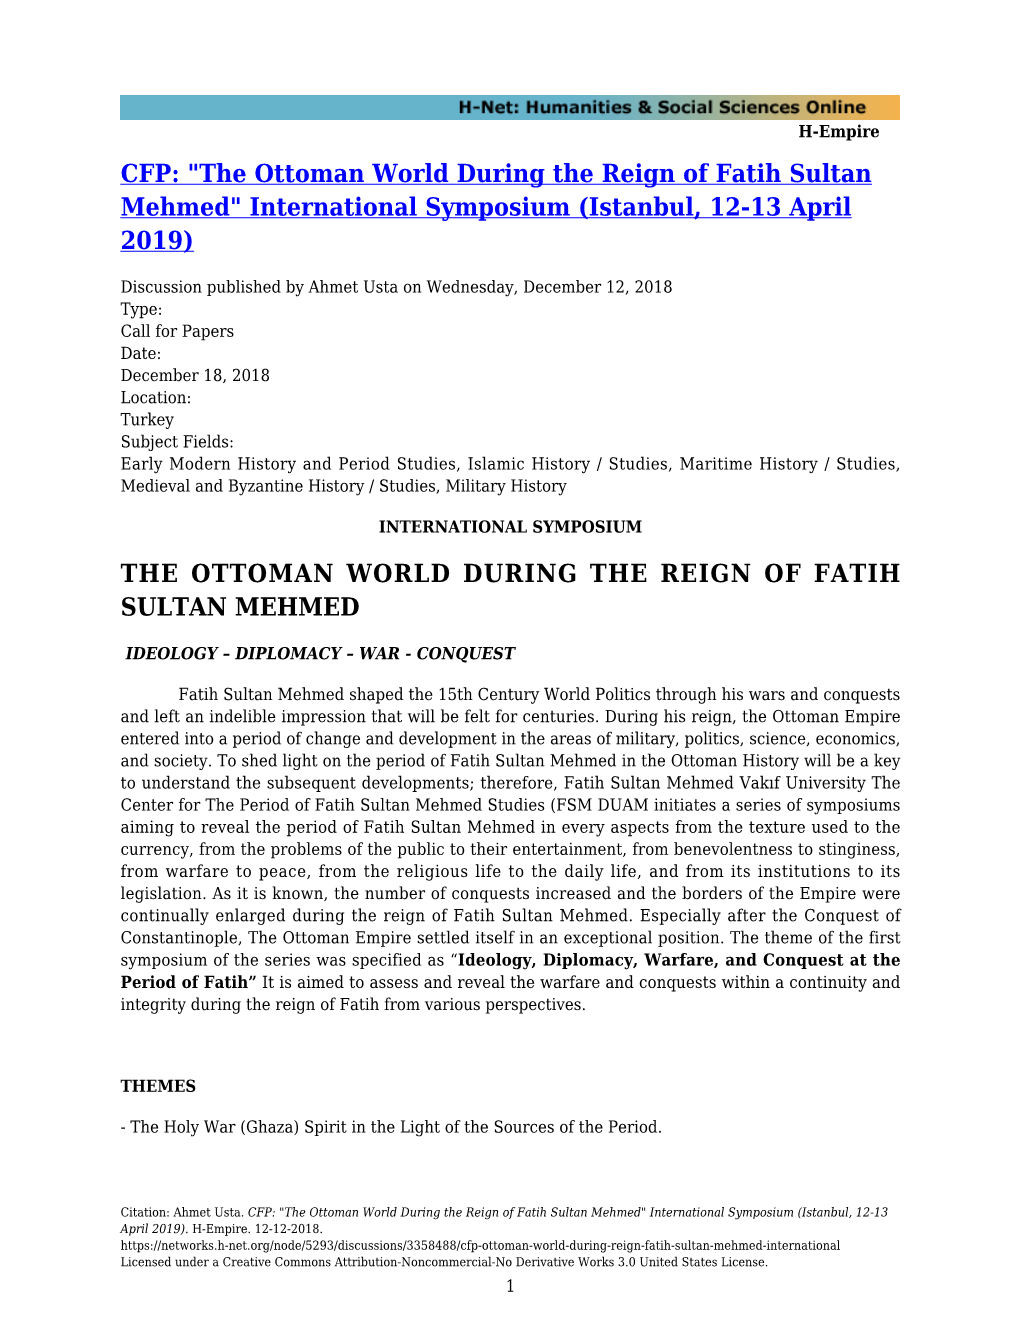 The Ottoman World During the Reign of Fatih Sultan Mehmed" International Symposium (Istanbul, 12-13 April 2019)